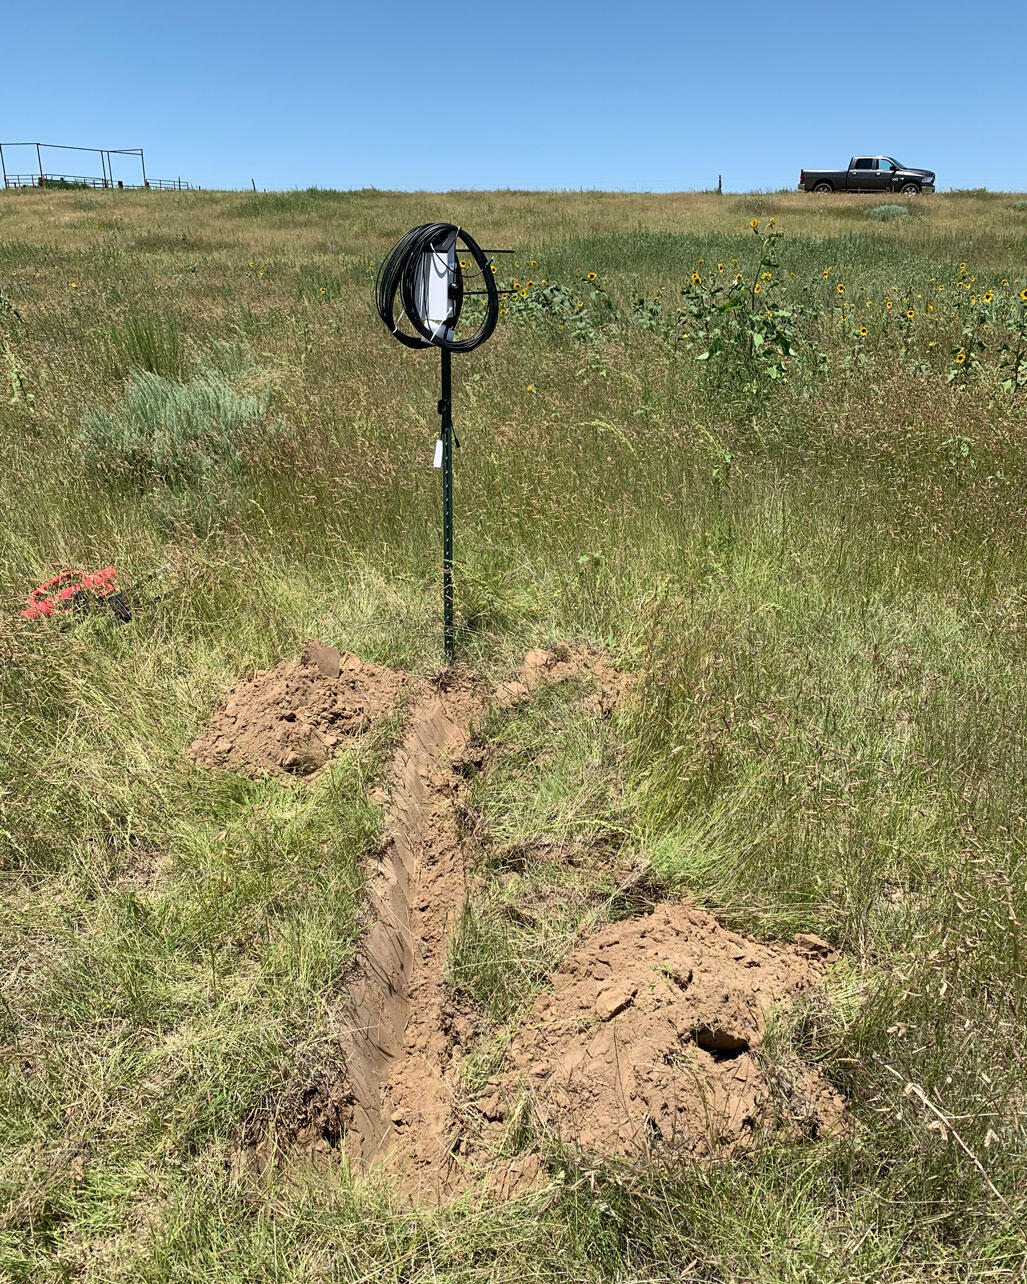 A data logger on a fence post in a prairie with disturbed soil before it.